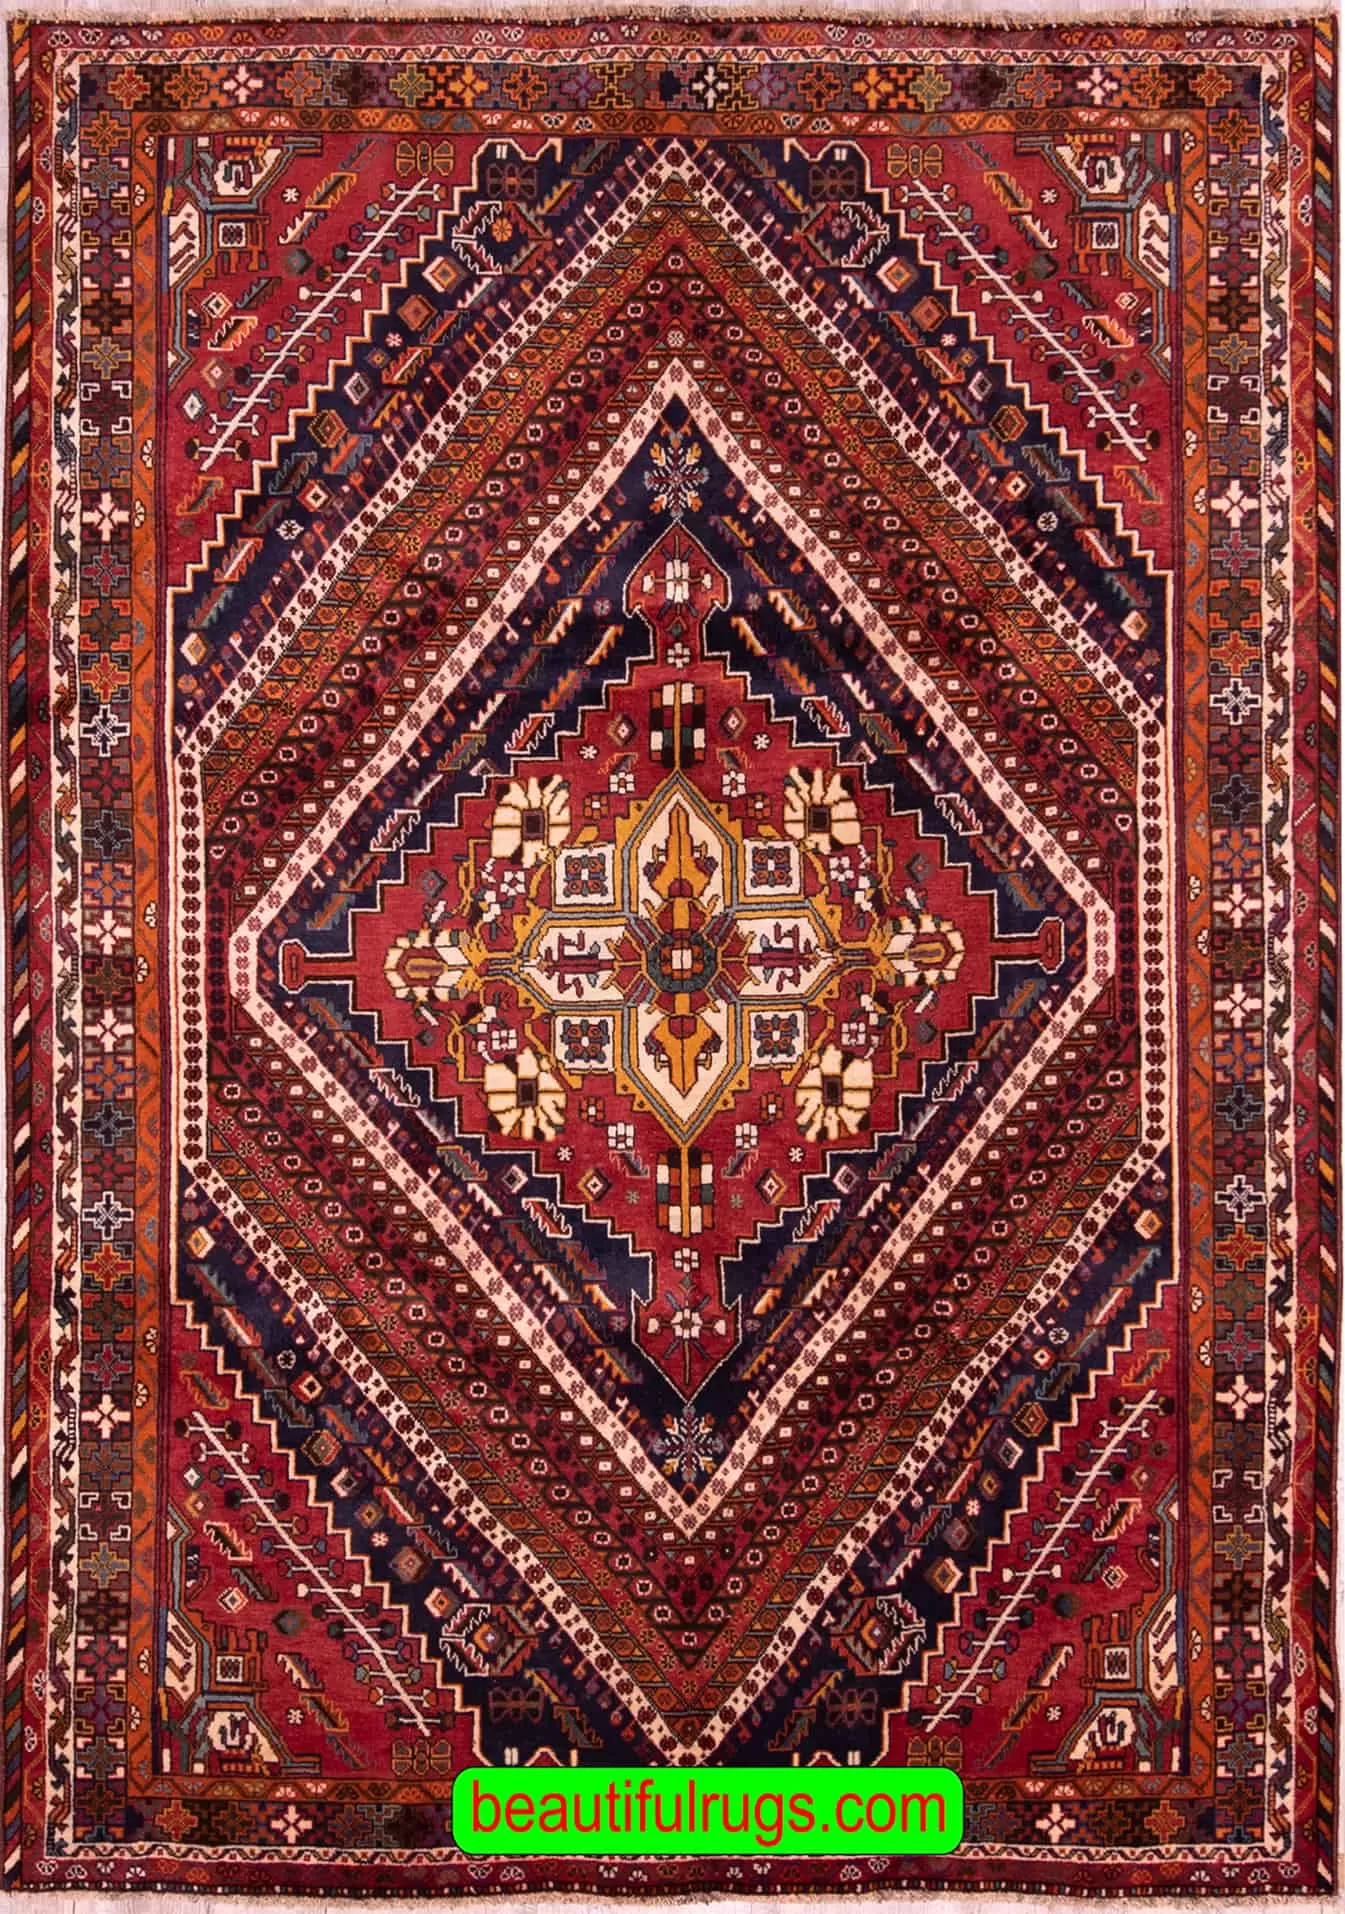 Persian Shiraz wool rug in red color geometric style. Size 5.8x8.8